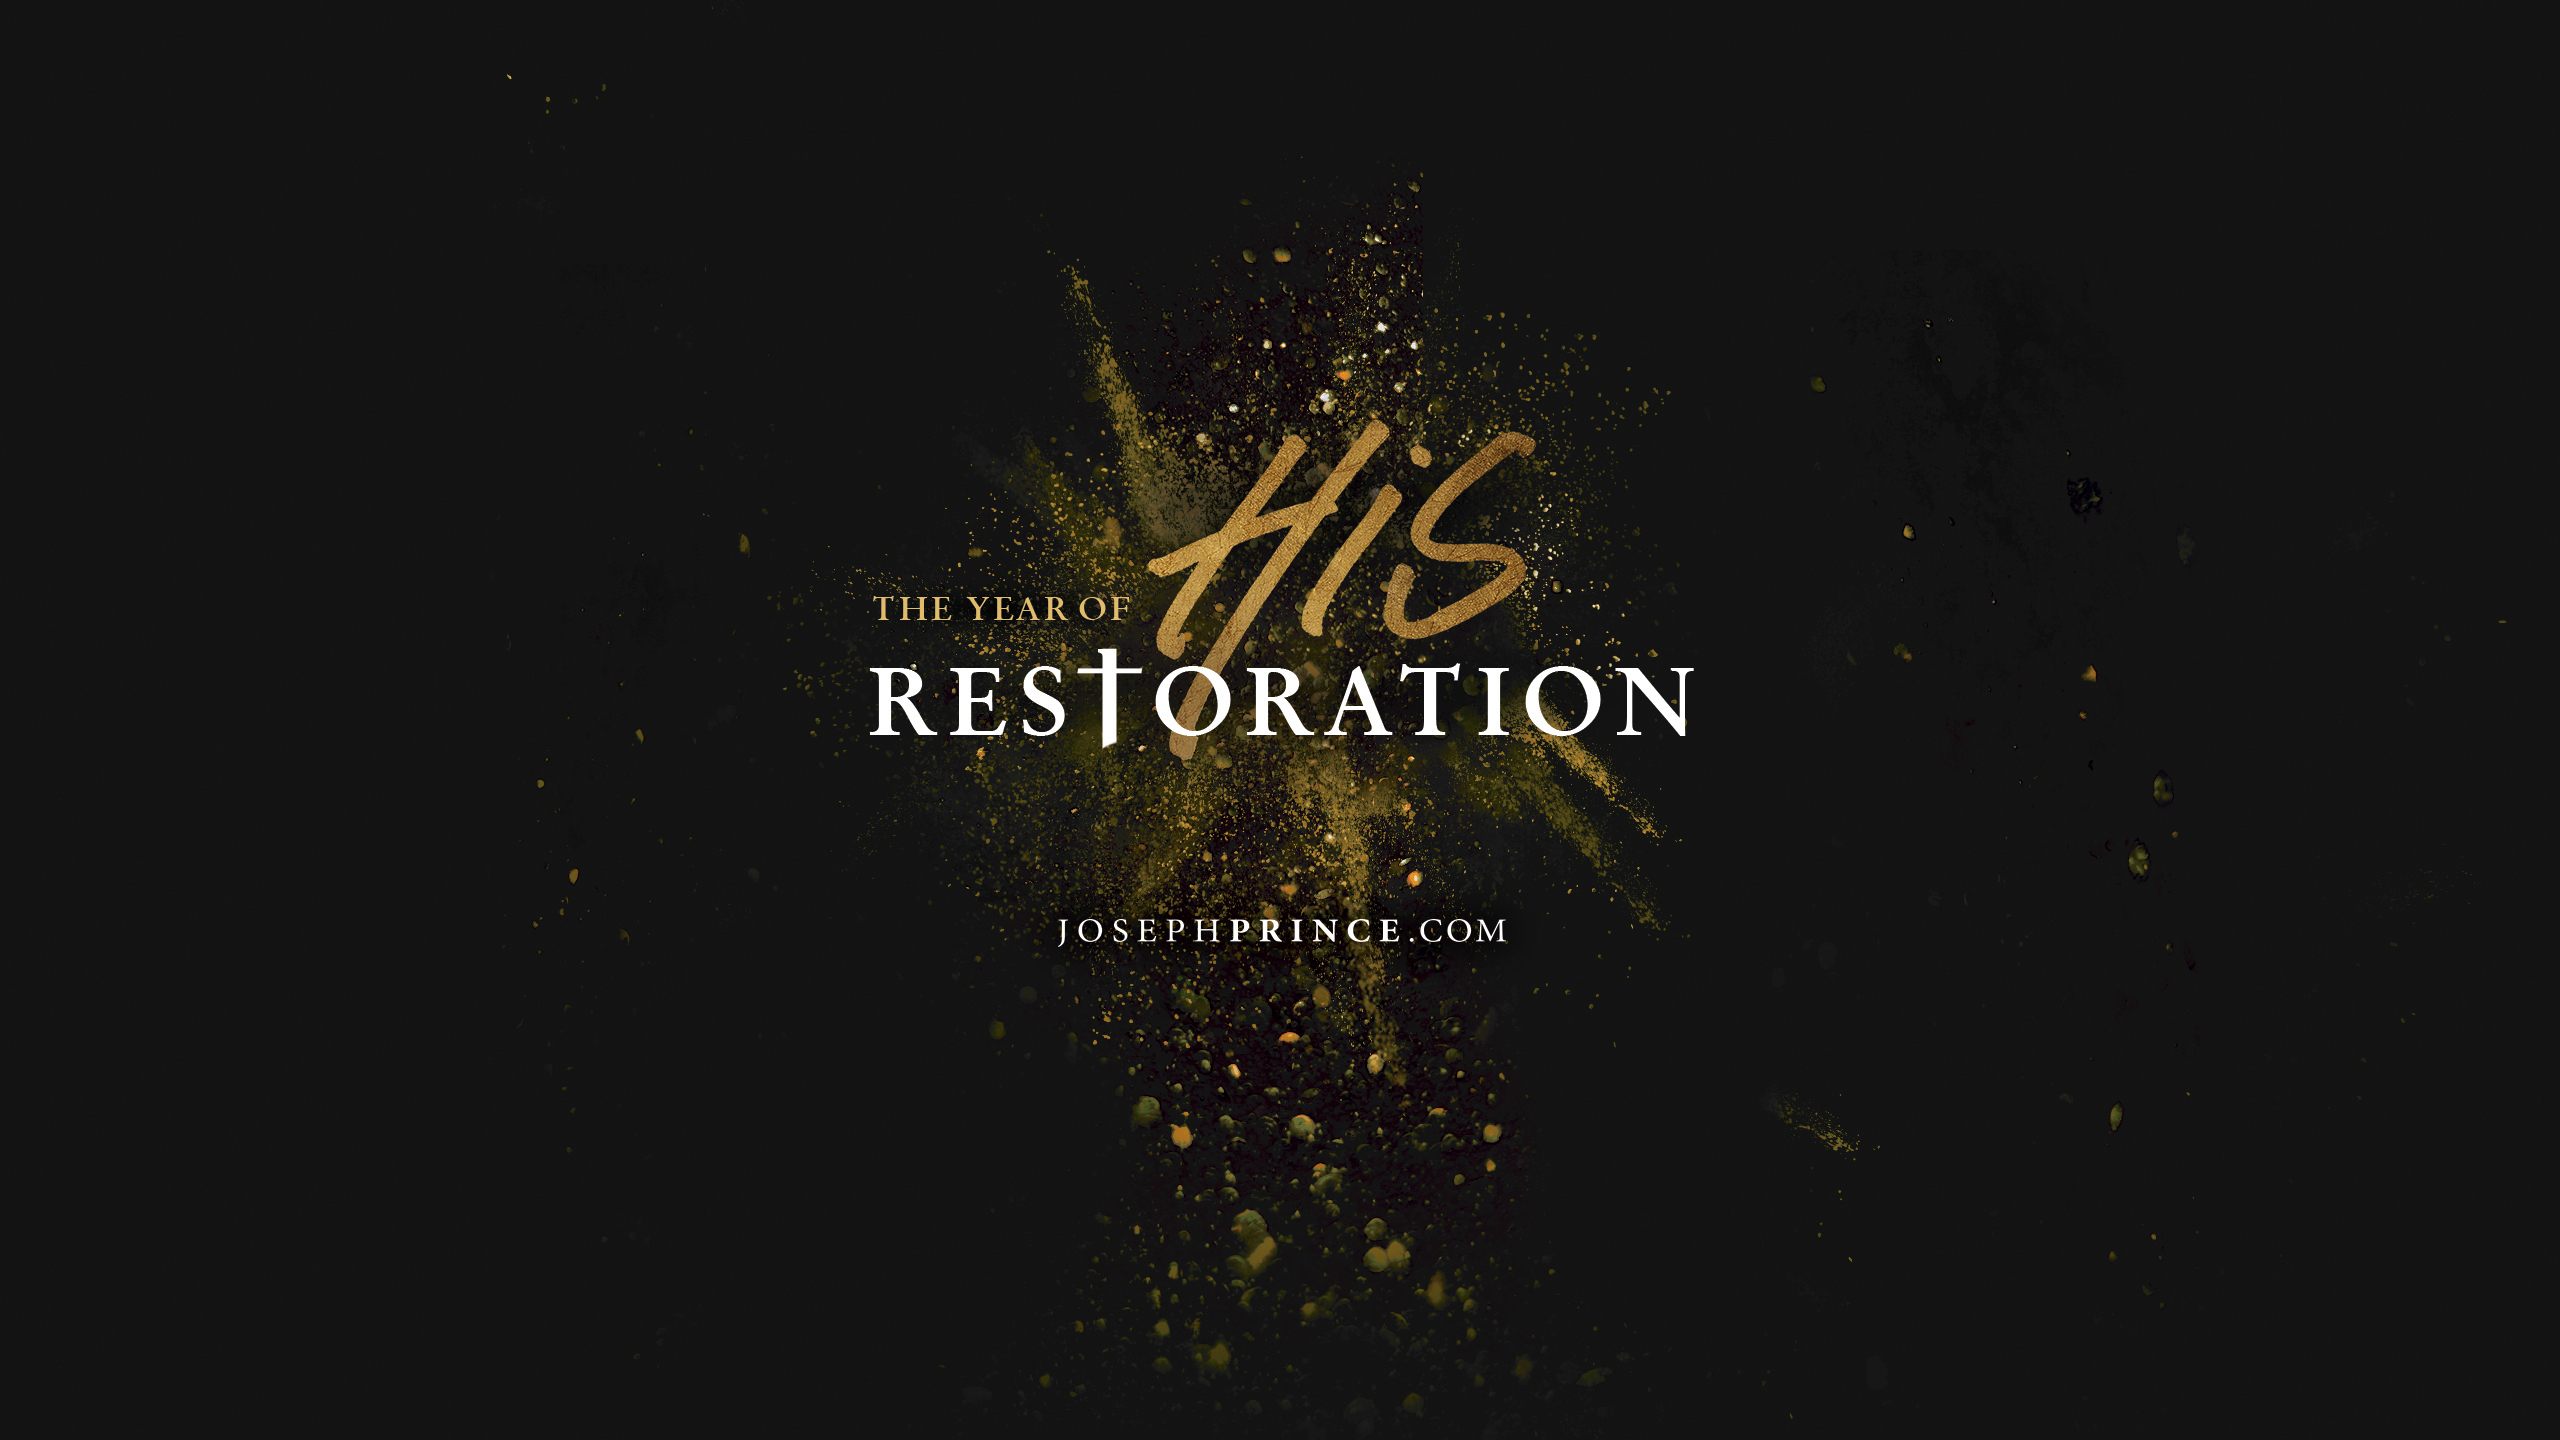 Josephprince The Year Of His Restoration